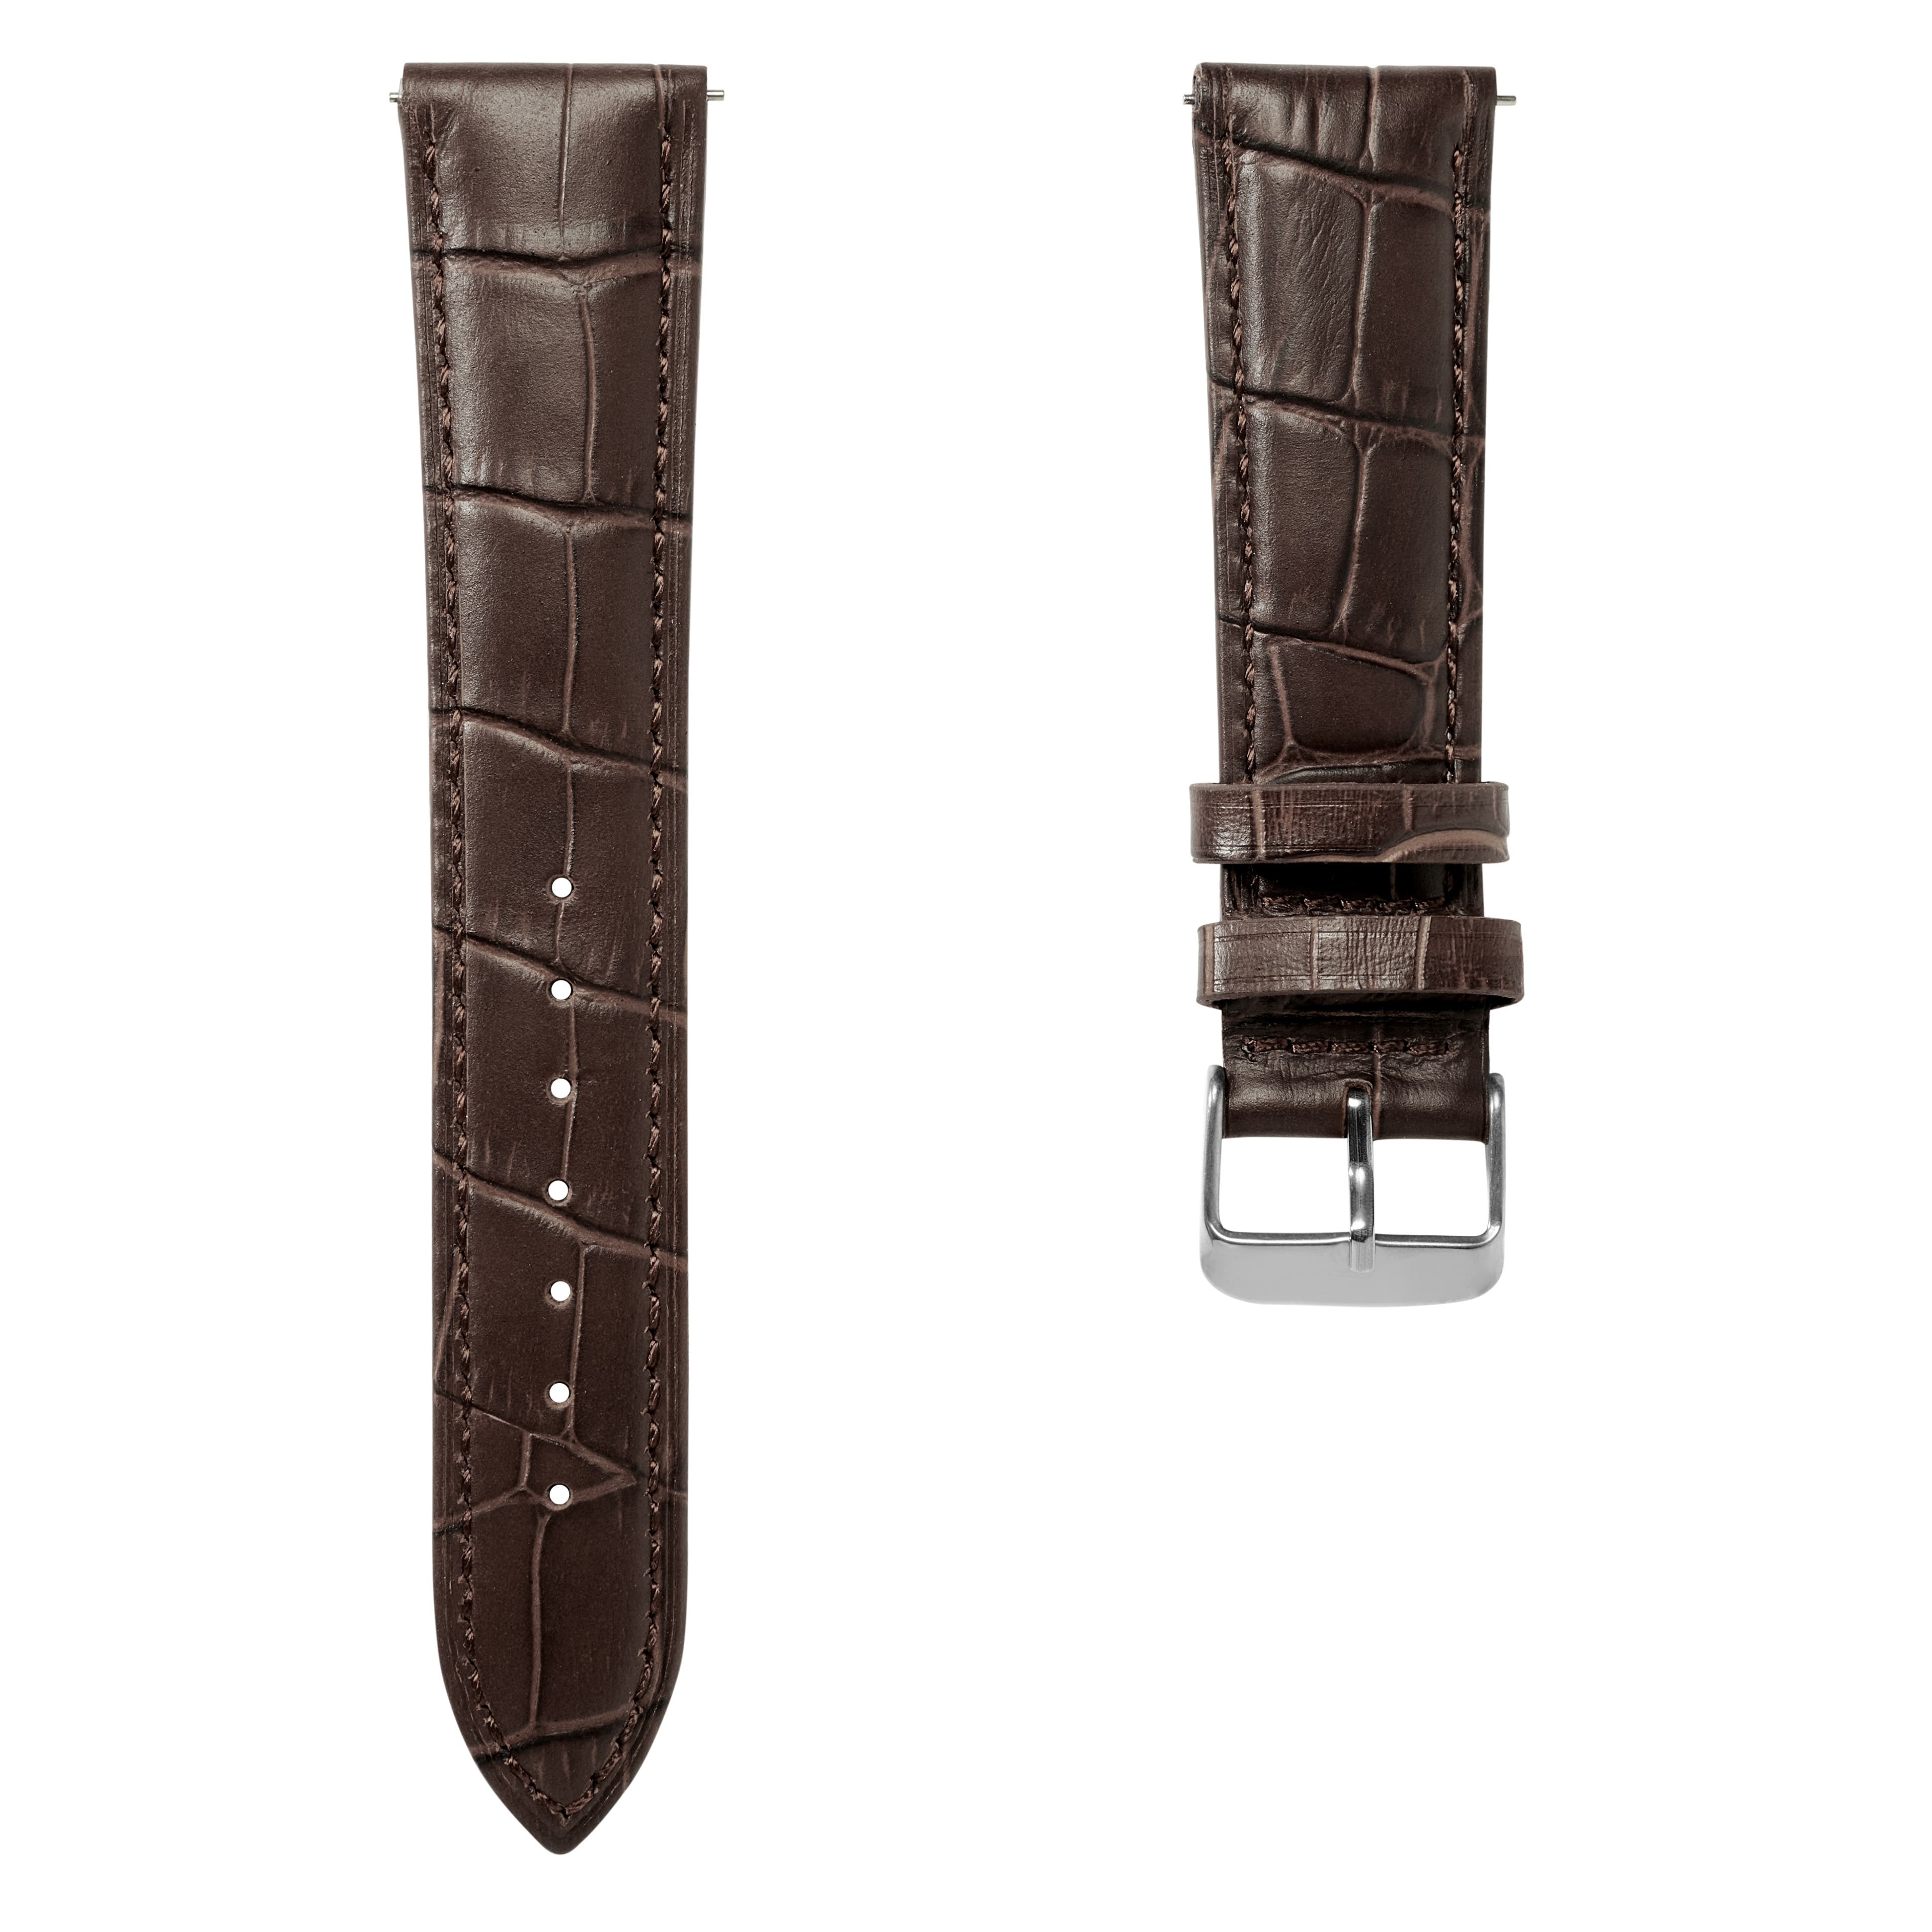 7/8" (22 mm) Crocodile-Embossed Dark-Brown Leather Watch Strap with Silver-Tone Buckle – Quick Release